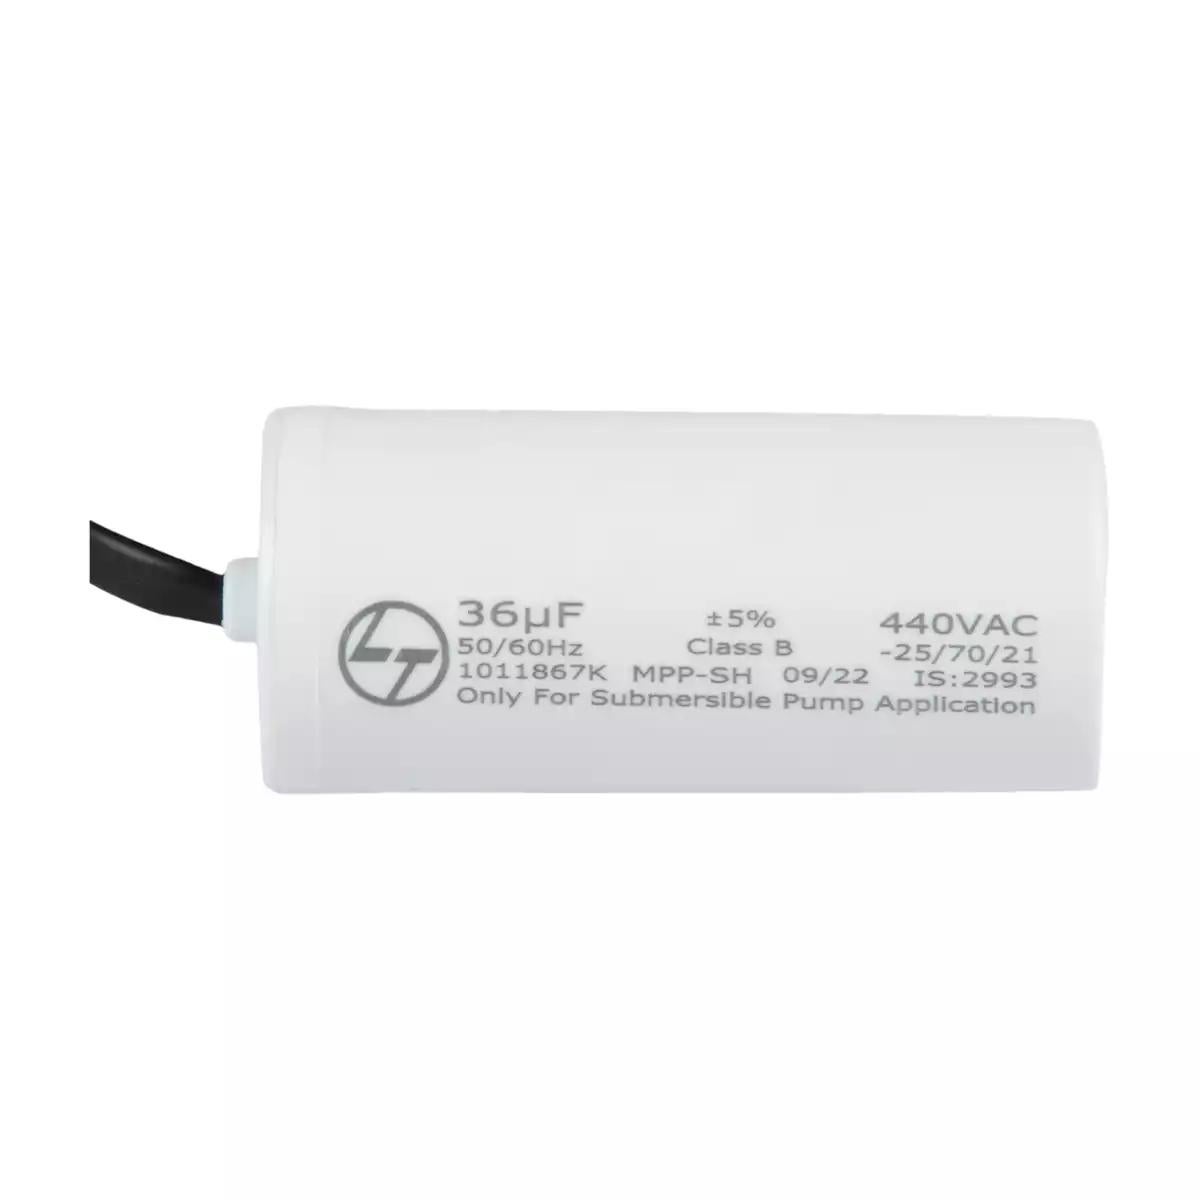 MFD Capacitor for 1ph application -MFD Capacitor with wires, Run Capacitor, 36 µF, 440V